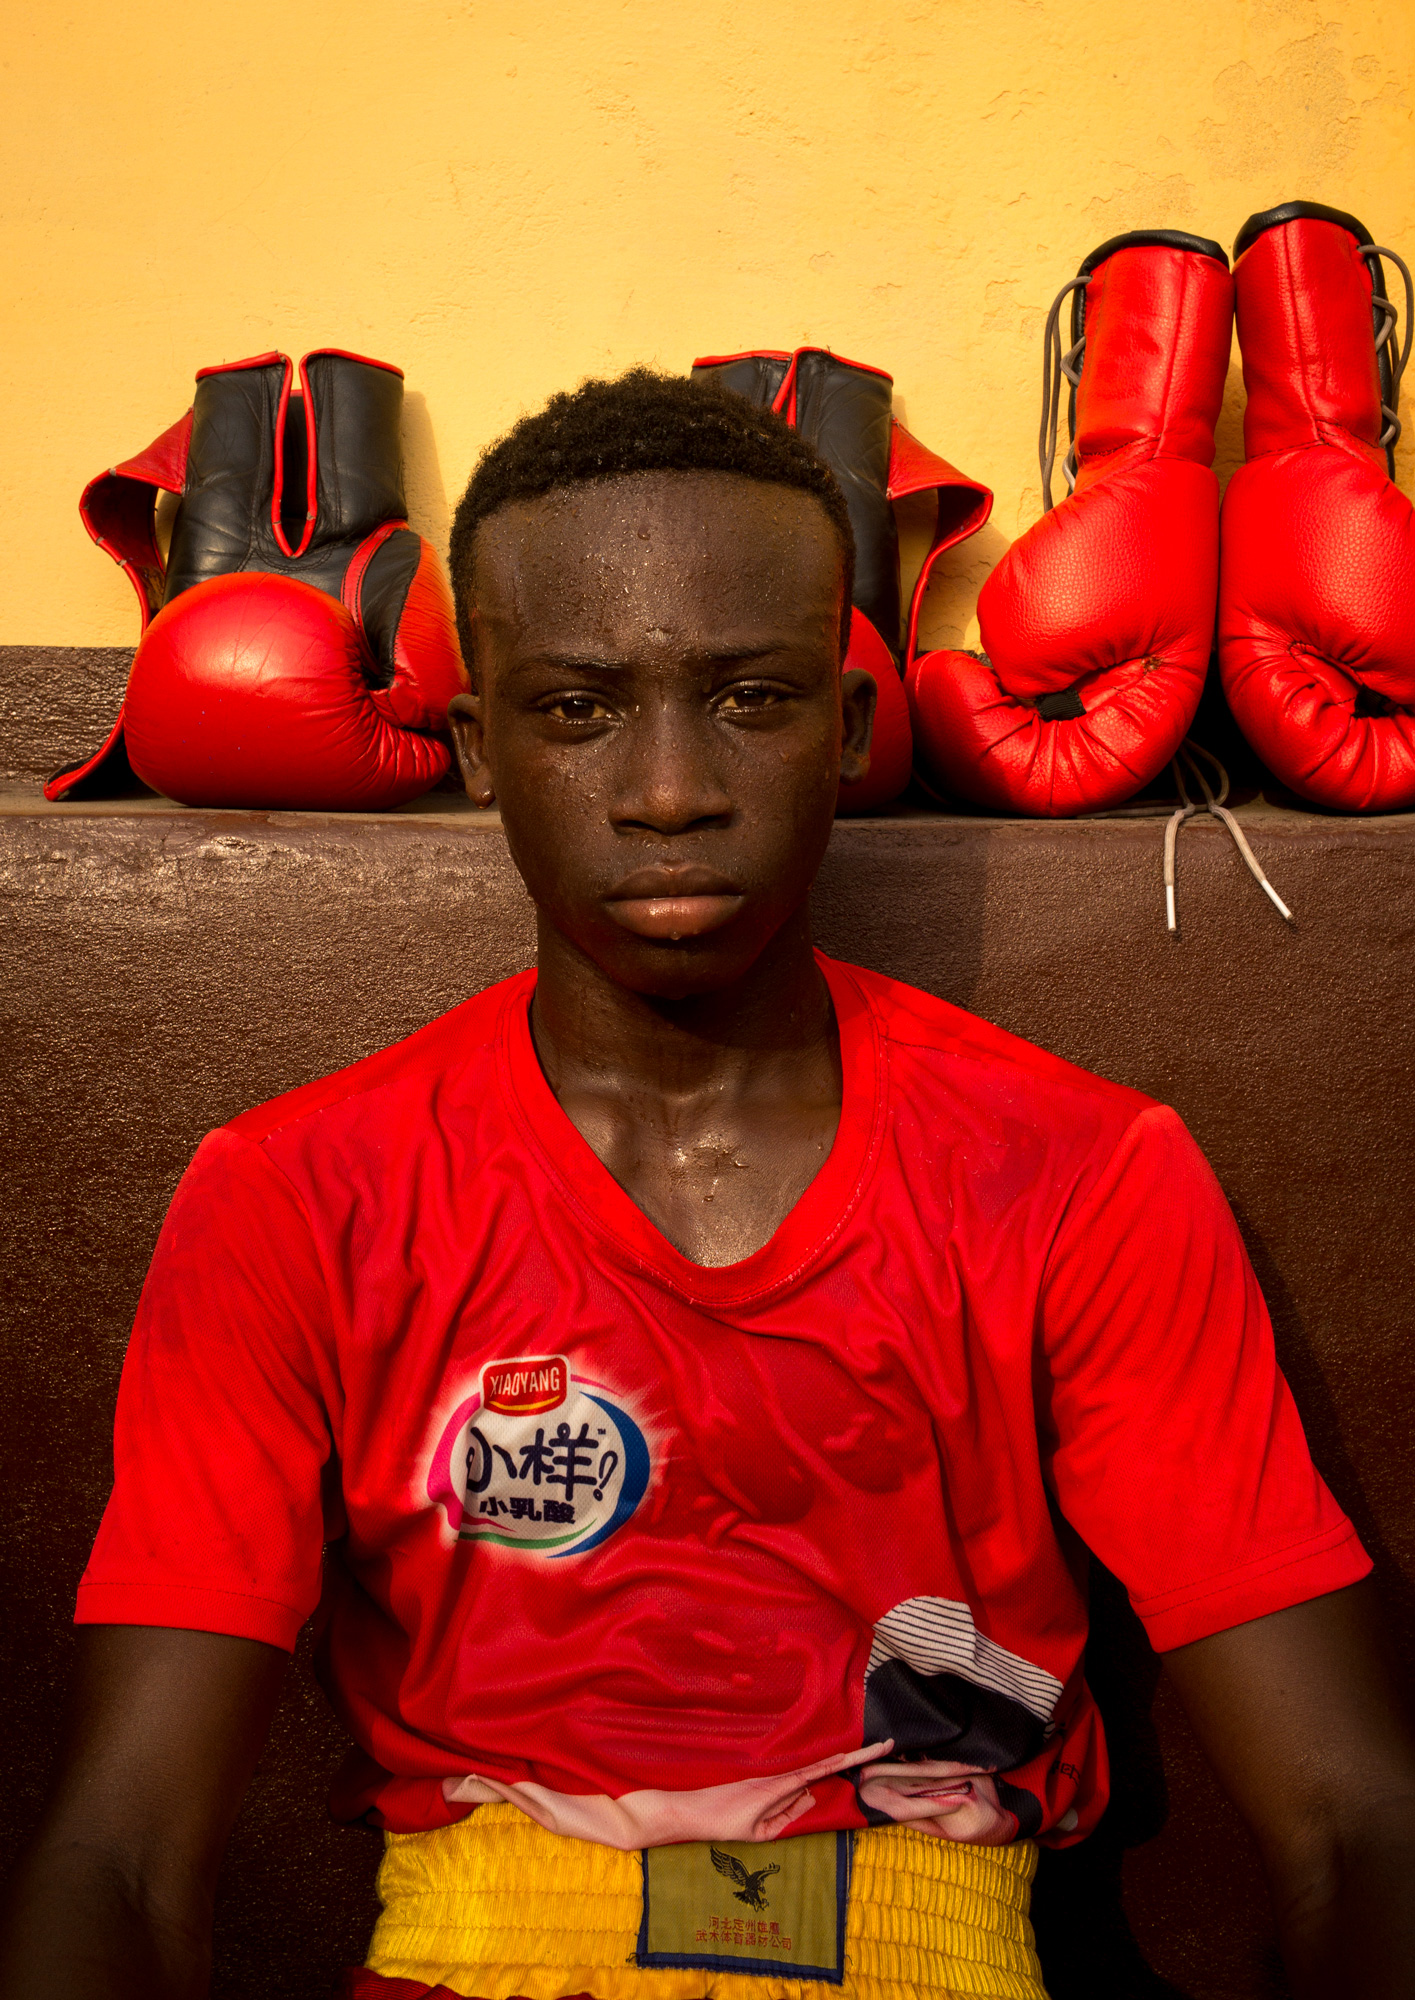  Samuel Takgi, 17, will be among the few athletes to represent Ghana at the 2020 Olympics held in Tokyo - Discipline Boxing Academy, James town 